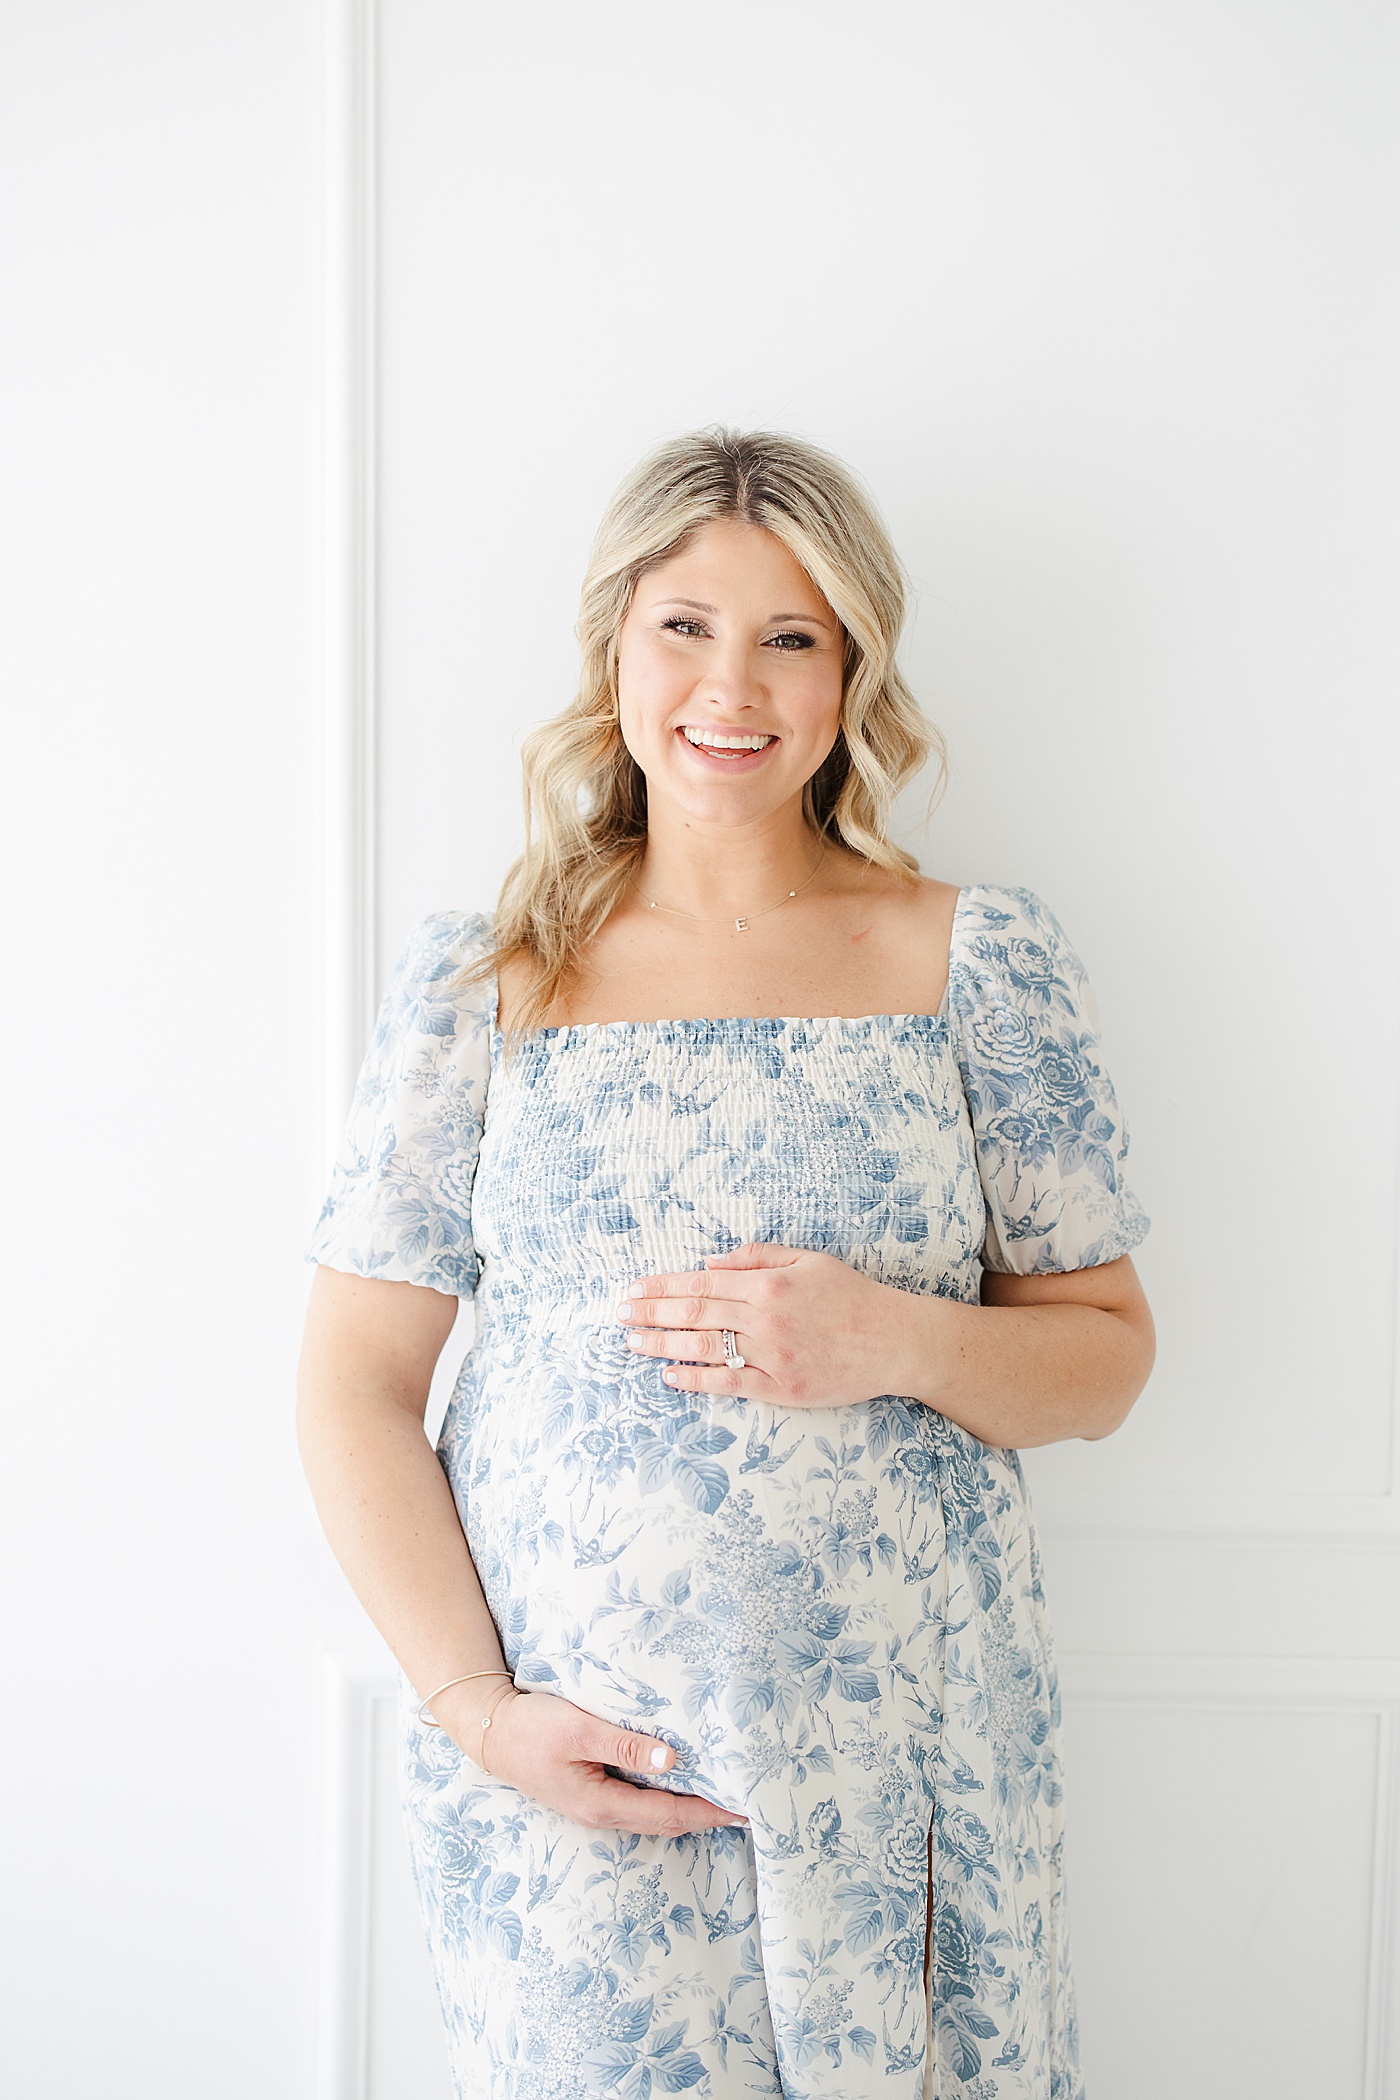 Expecting mom wearing a blue floral dress for maternity photos in studio with Kristin Wood Photography.